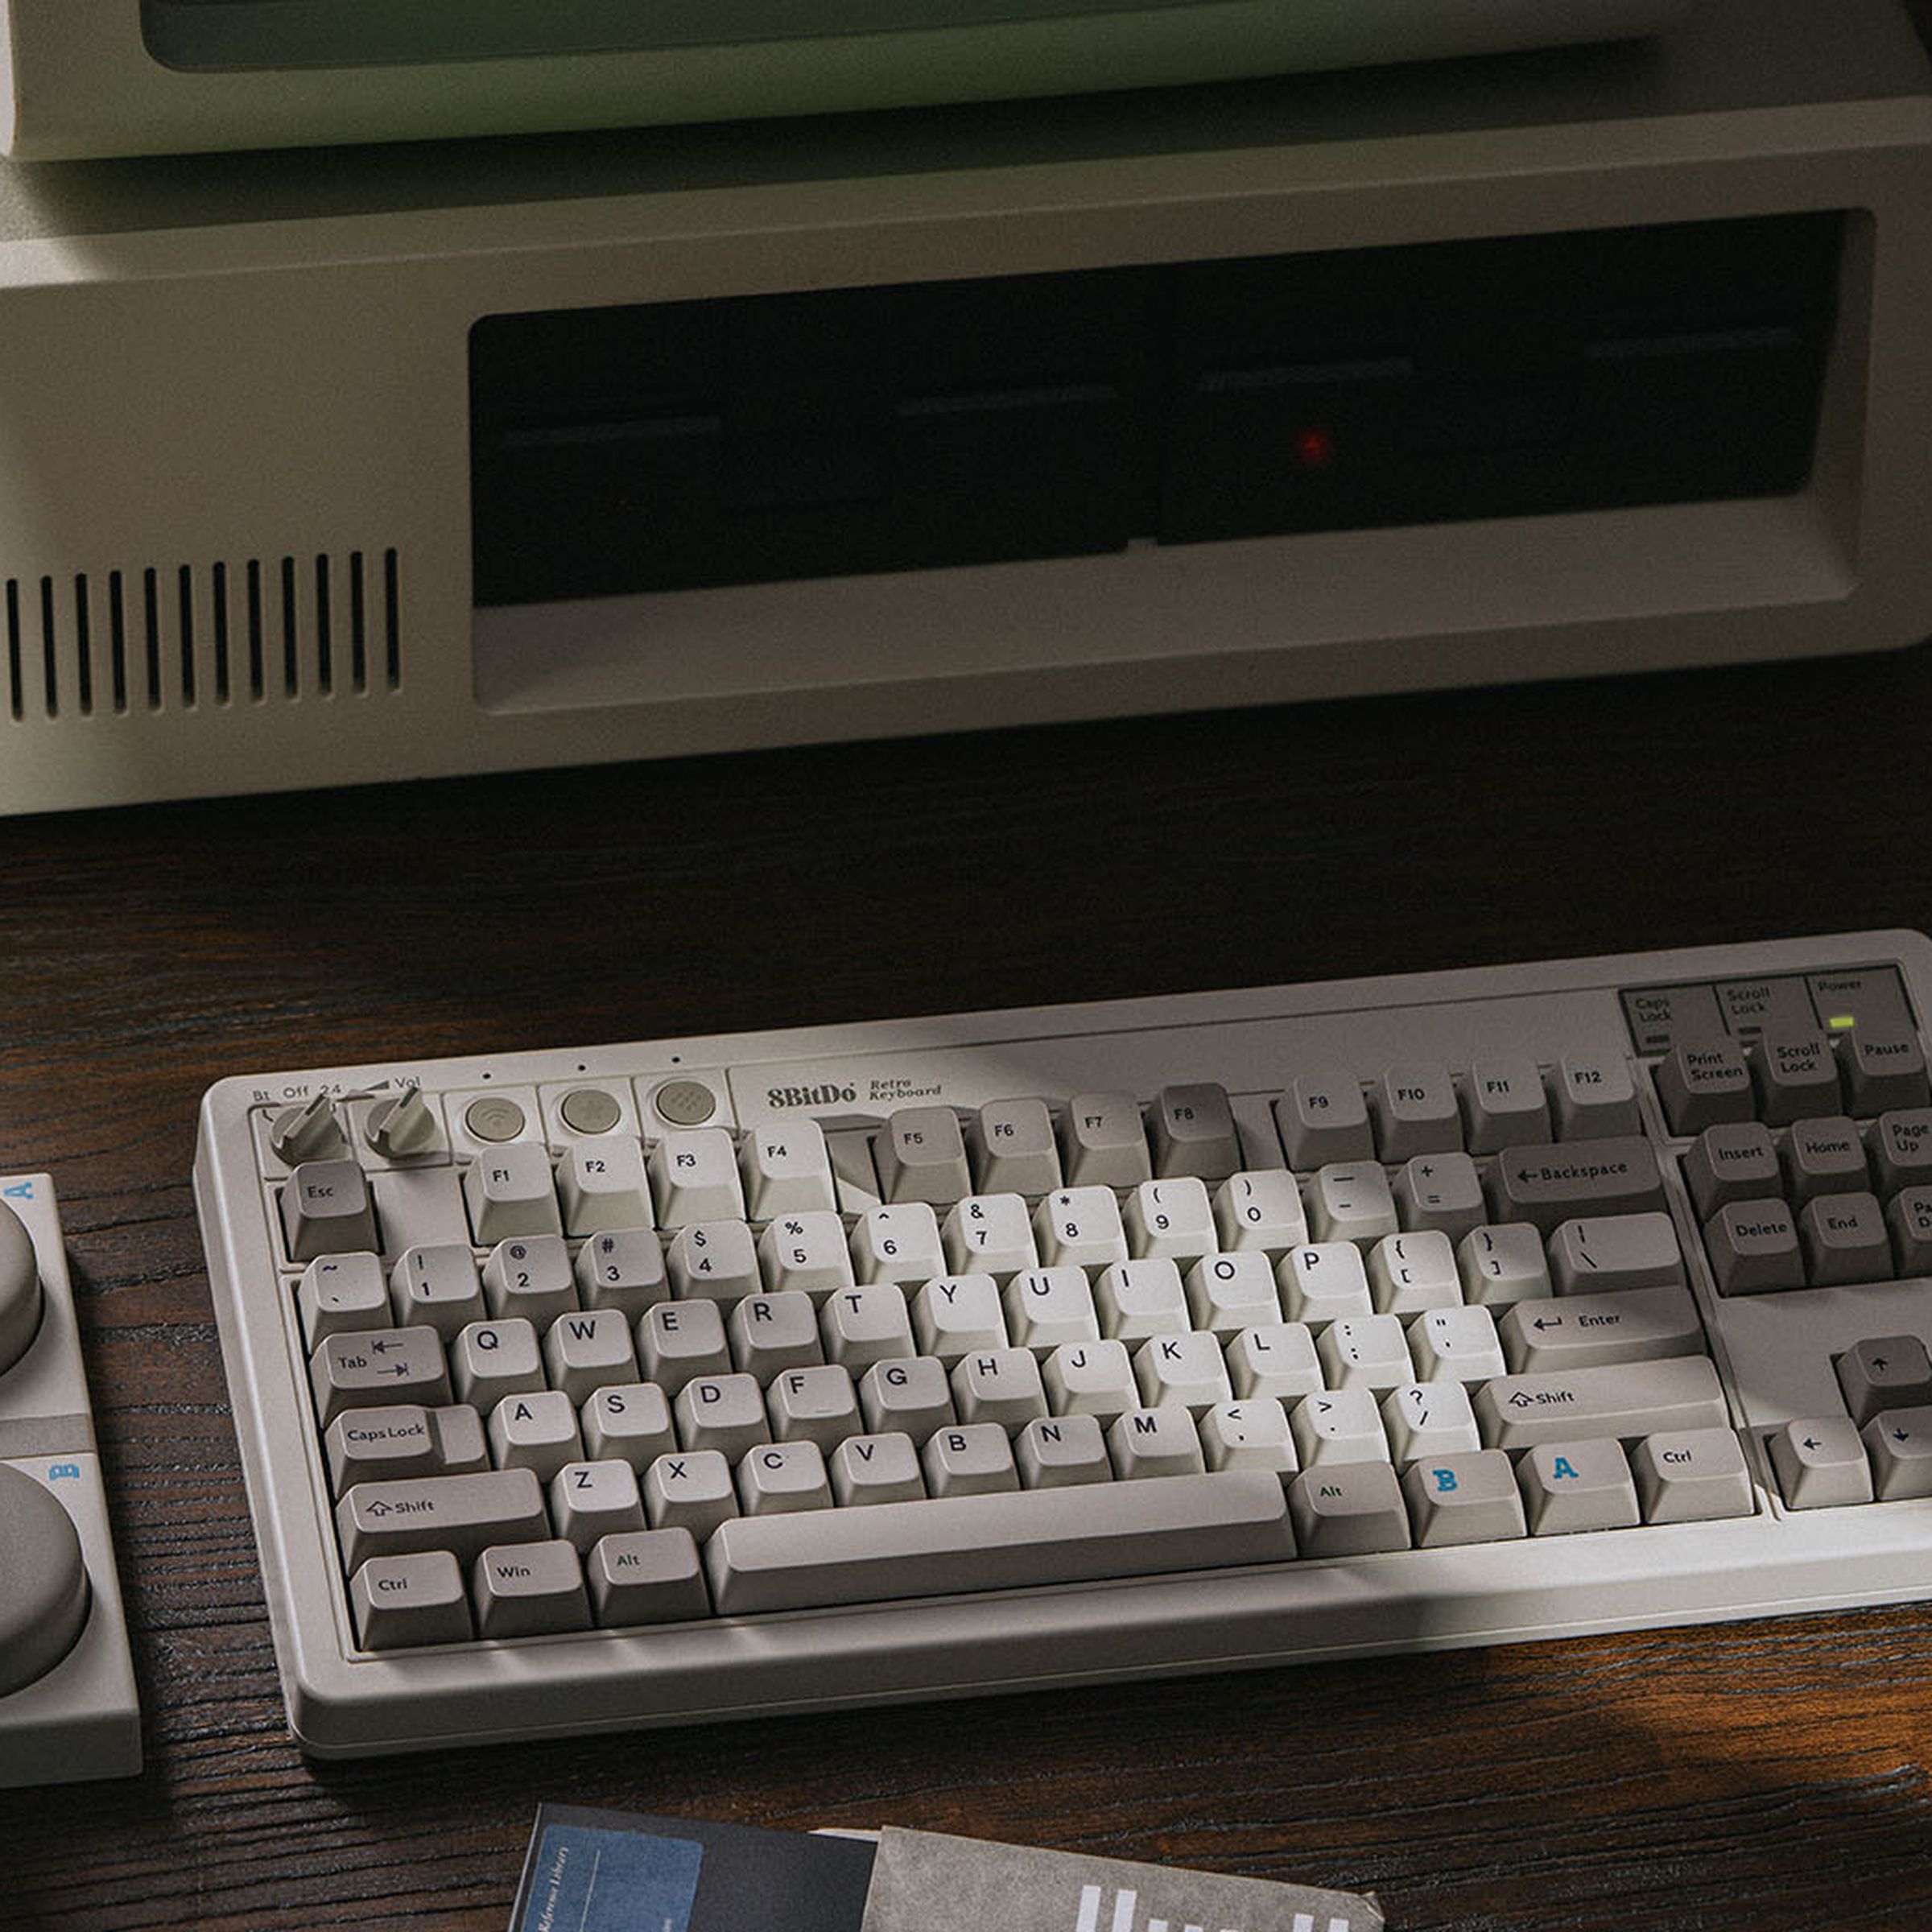 8BitDo’s M Edition mechanical keyboard on a desk alongside its macro buttons, in front of a vintage IBM computer.